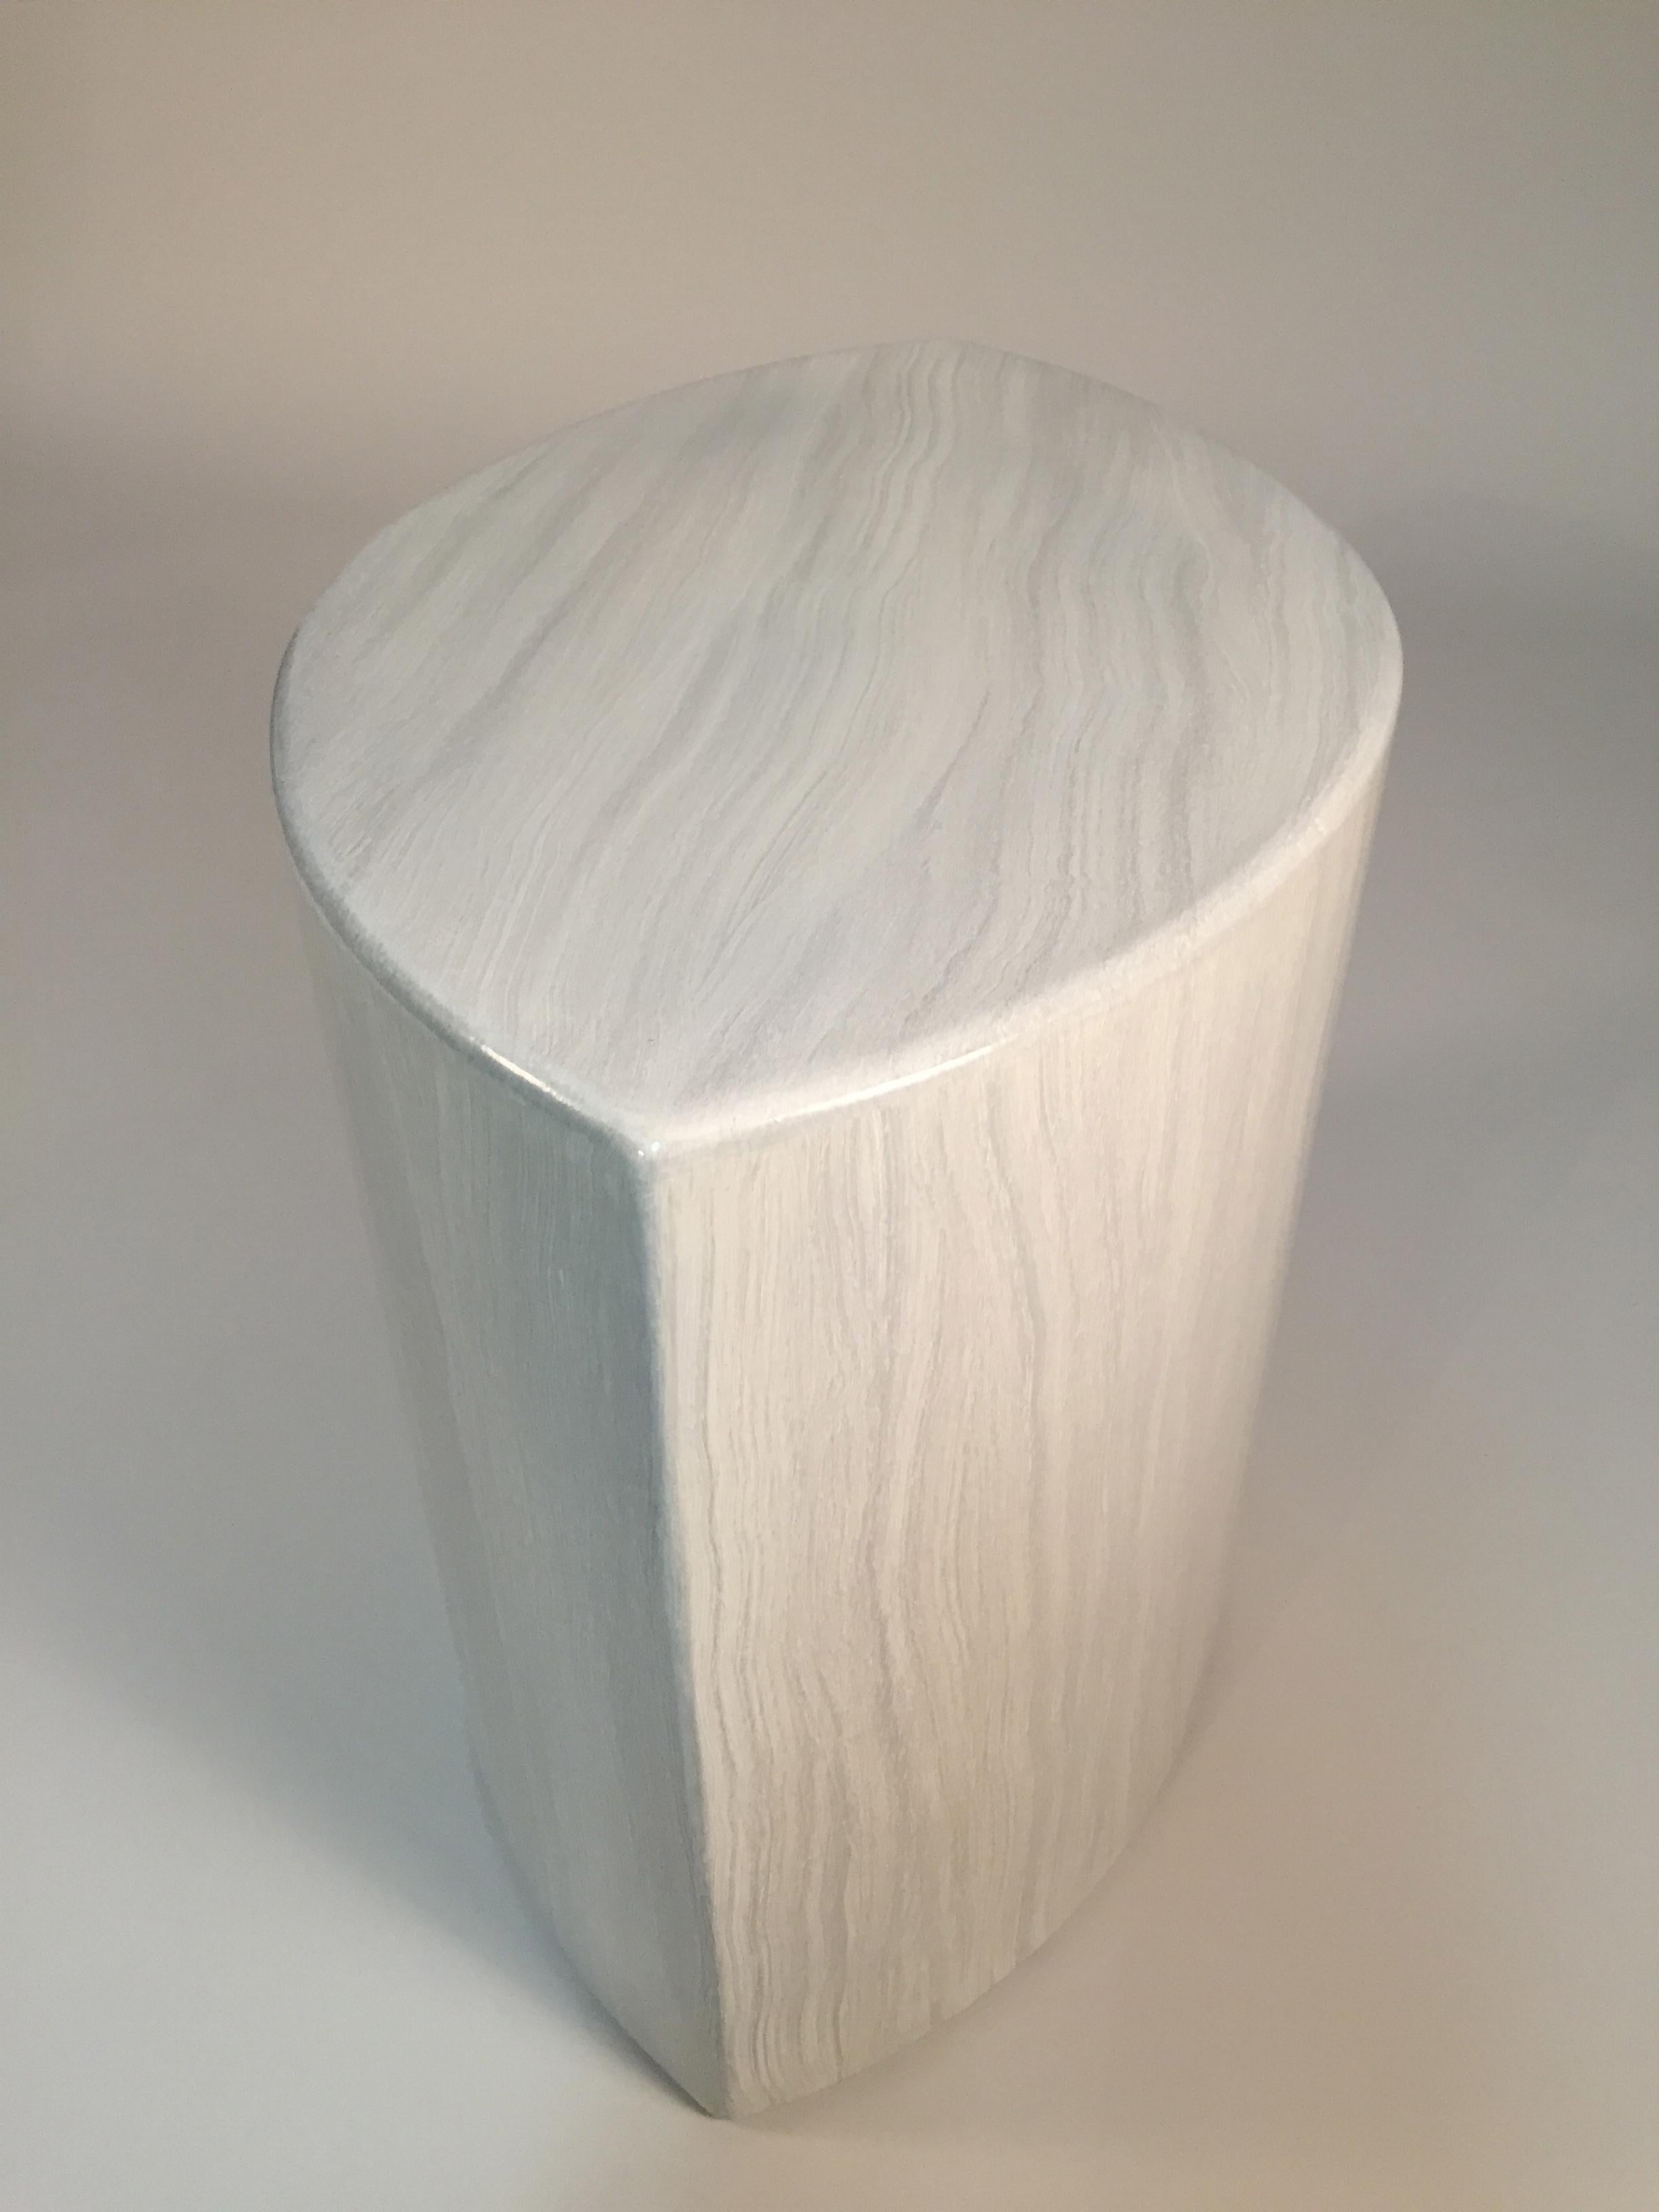 A lacquered hand shaped form has a brilliant gloss over a faux travertine. Faux stone allows the refined form an unorthodox grain curve and direction. Multi use for a side table or seating.